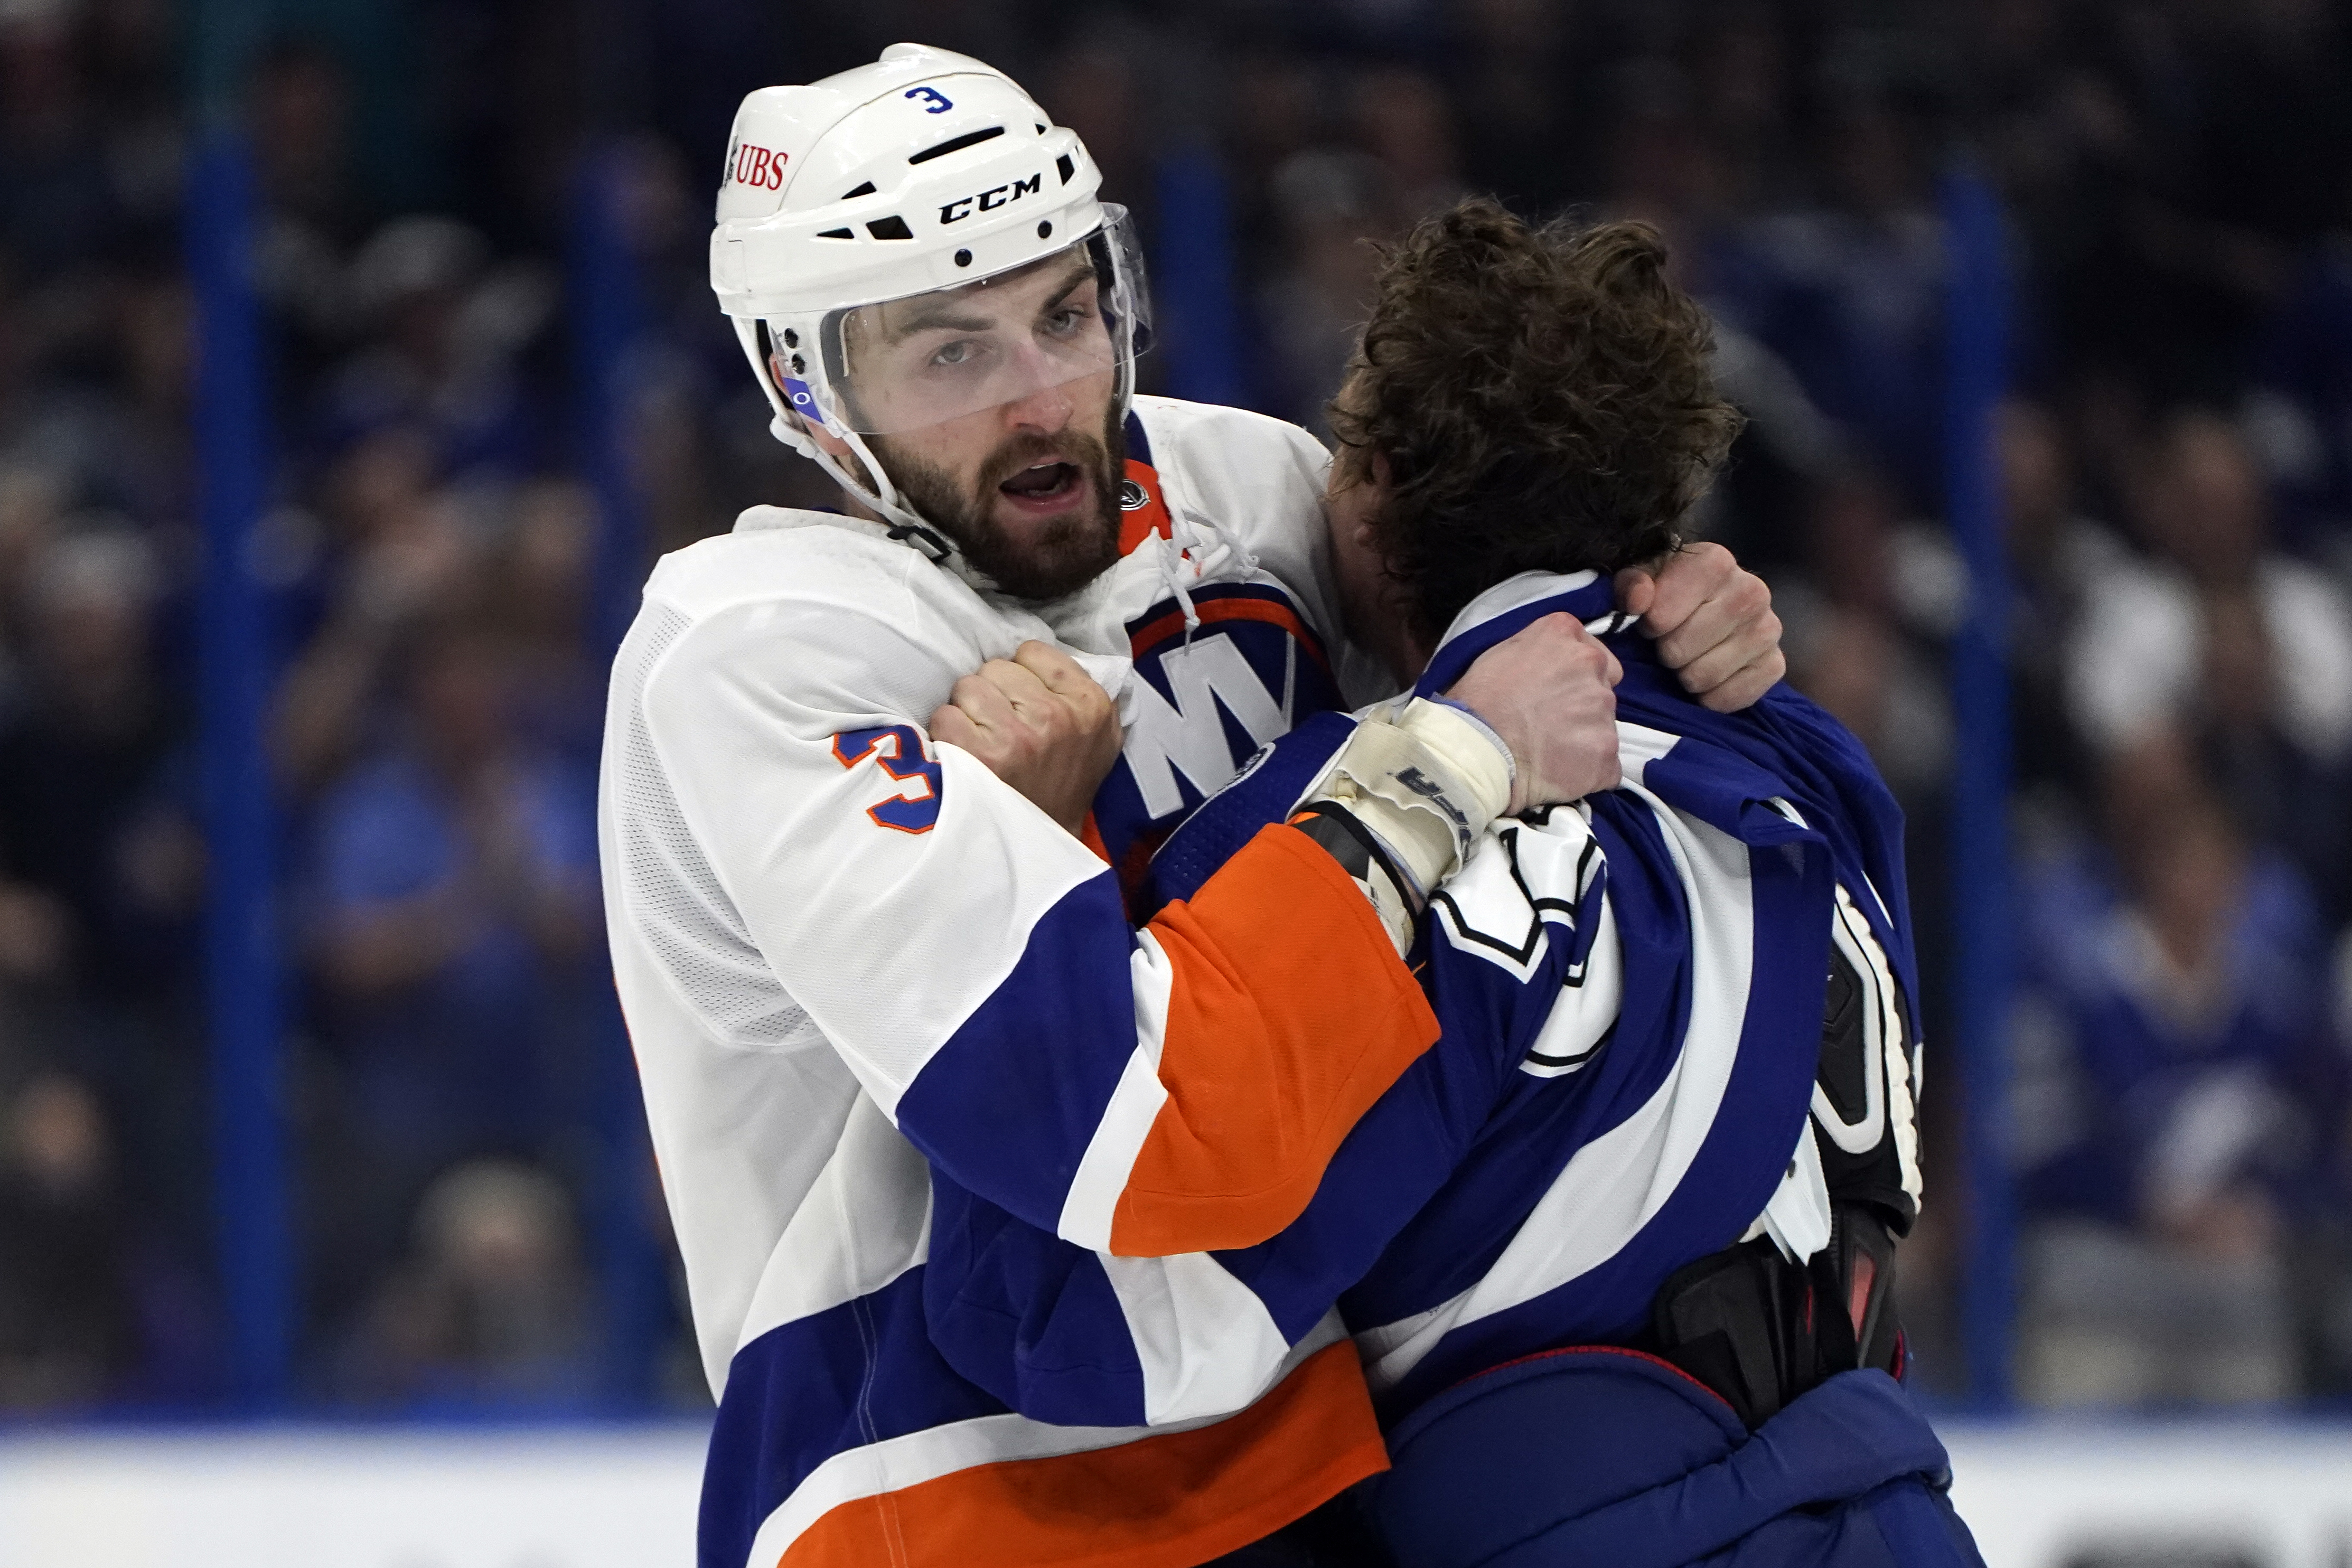 NHL playoffs How to watch the Tampa Bay Lightning at New York Islanders Wednesday (6-23-21) for free